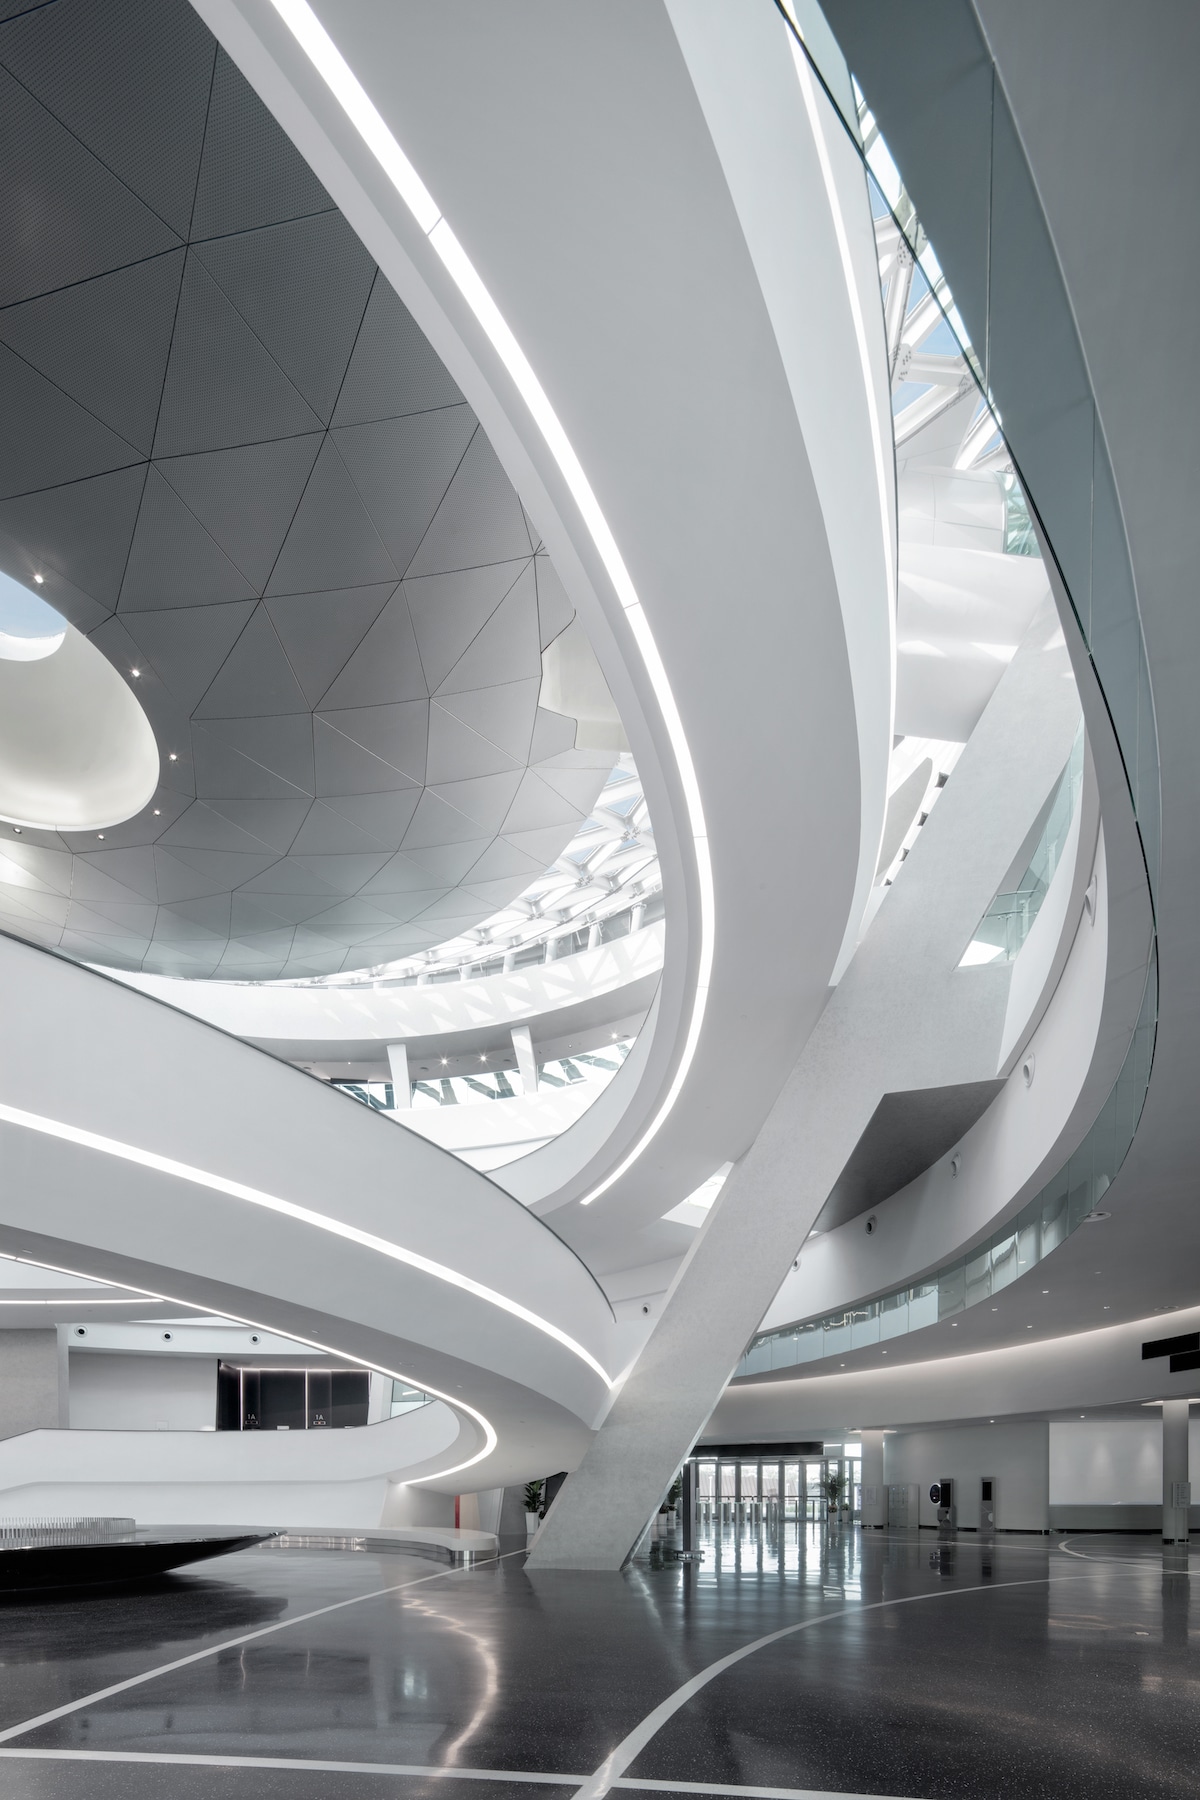 Interior Circulation of the Shanghai Astronomy Museum by Ennead Architects, Captured by Arch-Exist